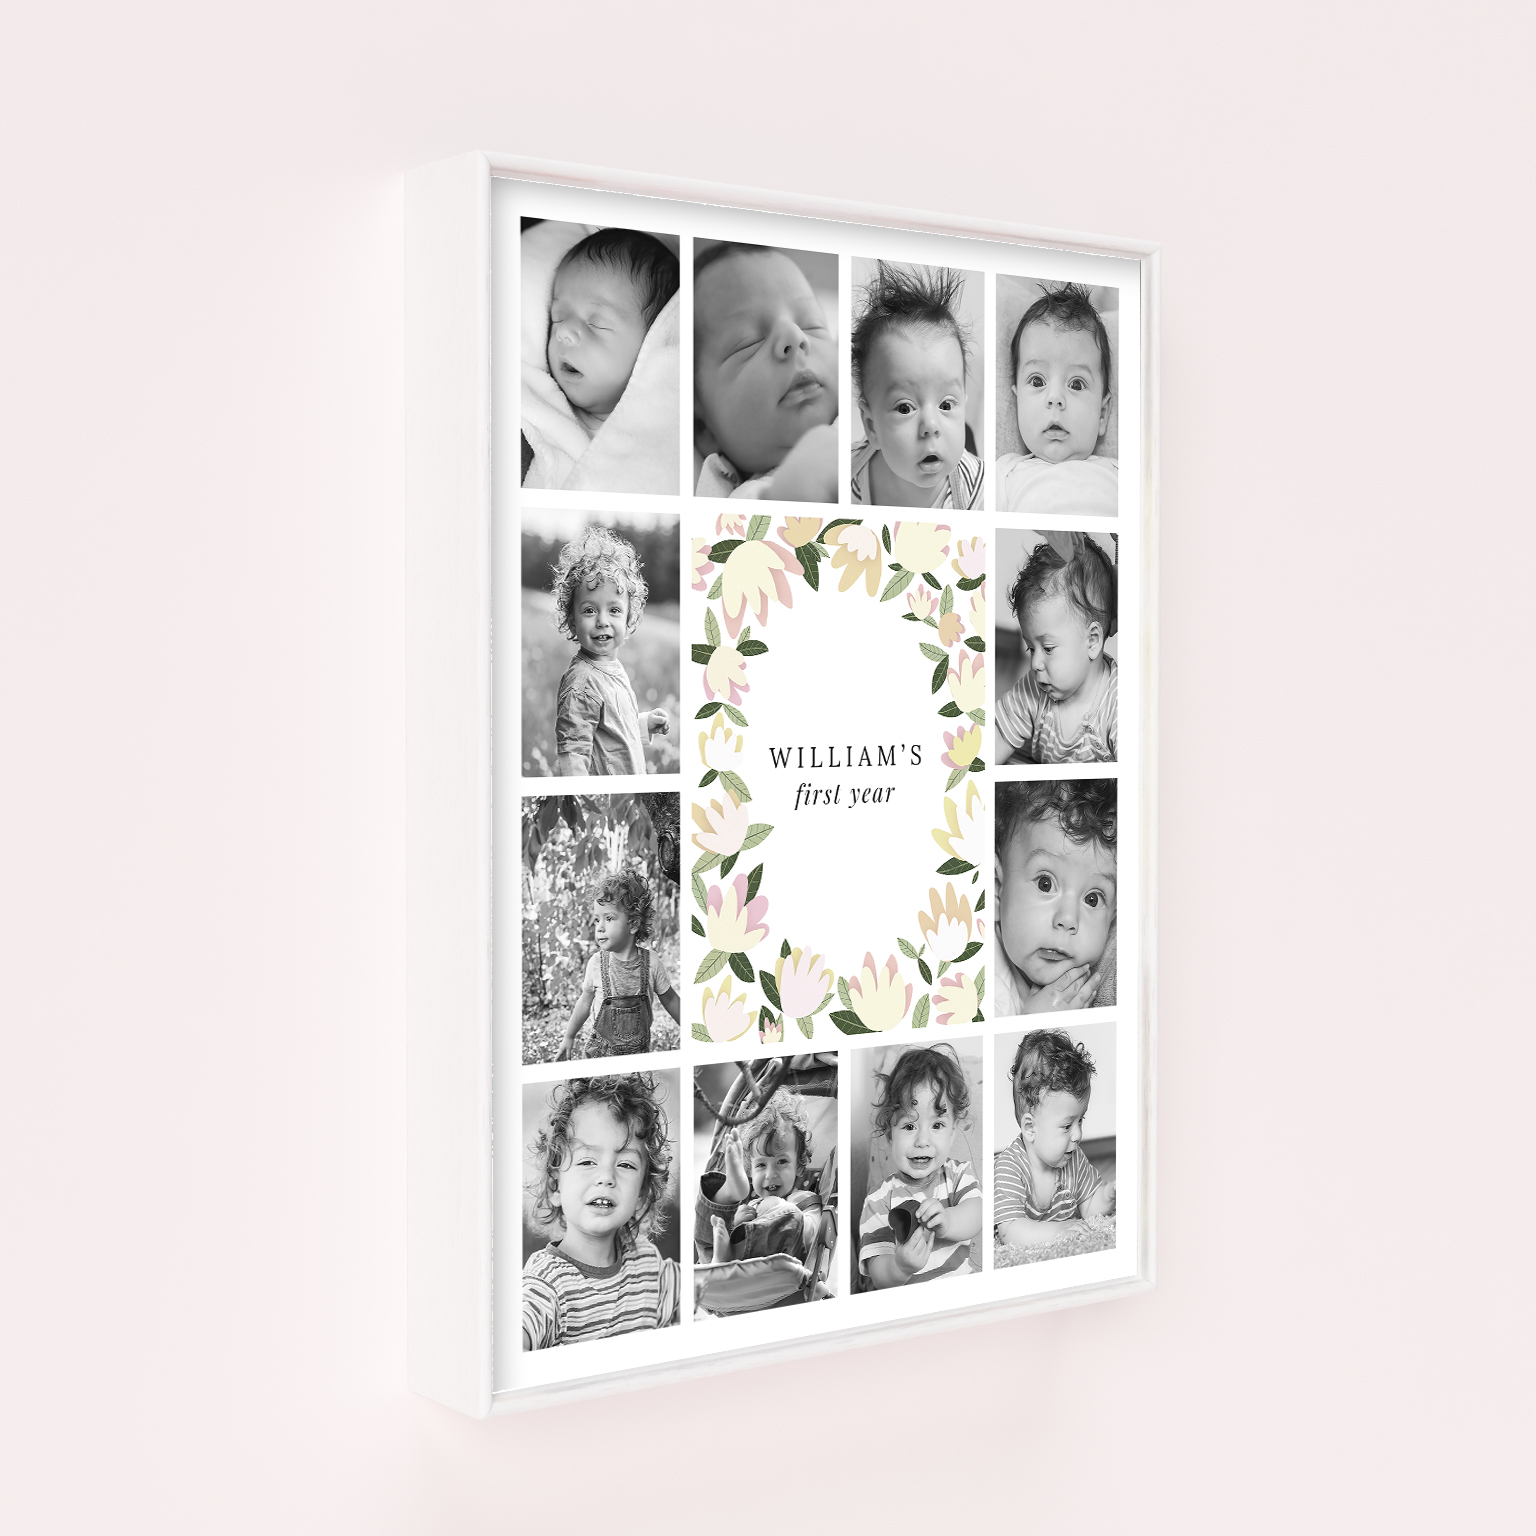 My First Year Wall Art Framed Prints - Capture the milestones of your baby's first year with this personalized portrait-oriented canvas. Create a custom display of 10+ cherished photos, sharing the joy of family growth and creating a heartwarming keepsake for first-time grandparents.